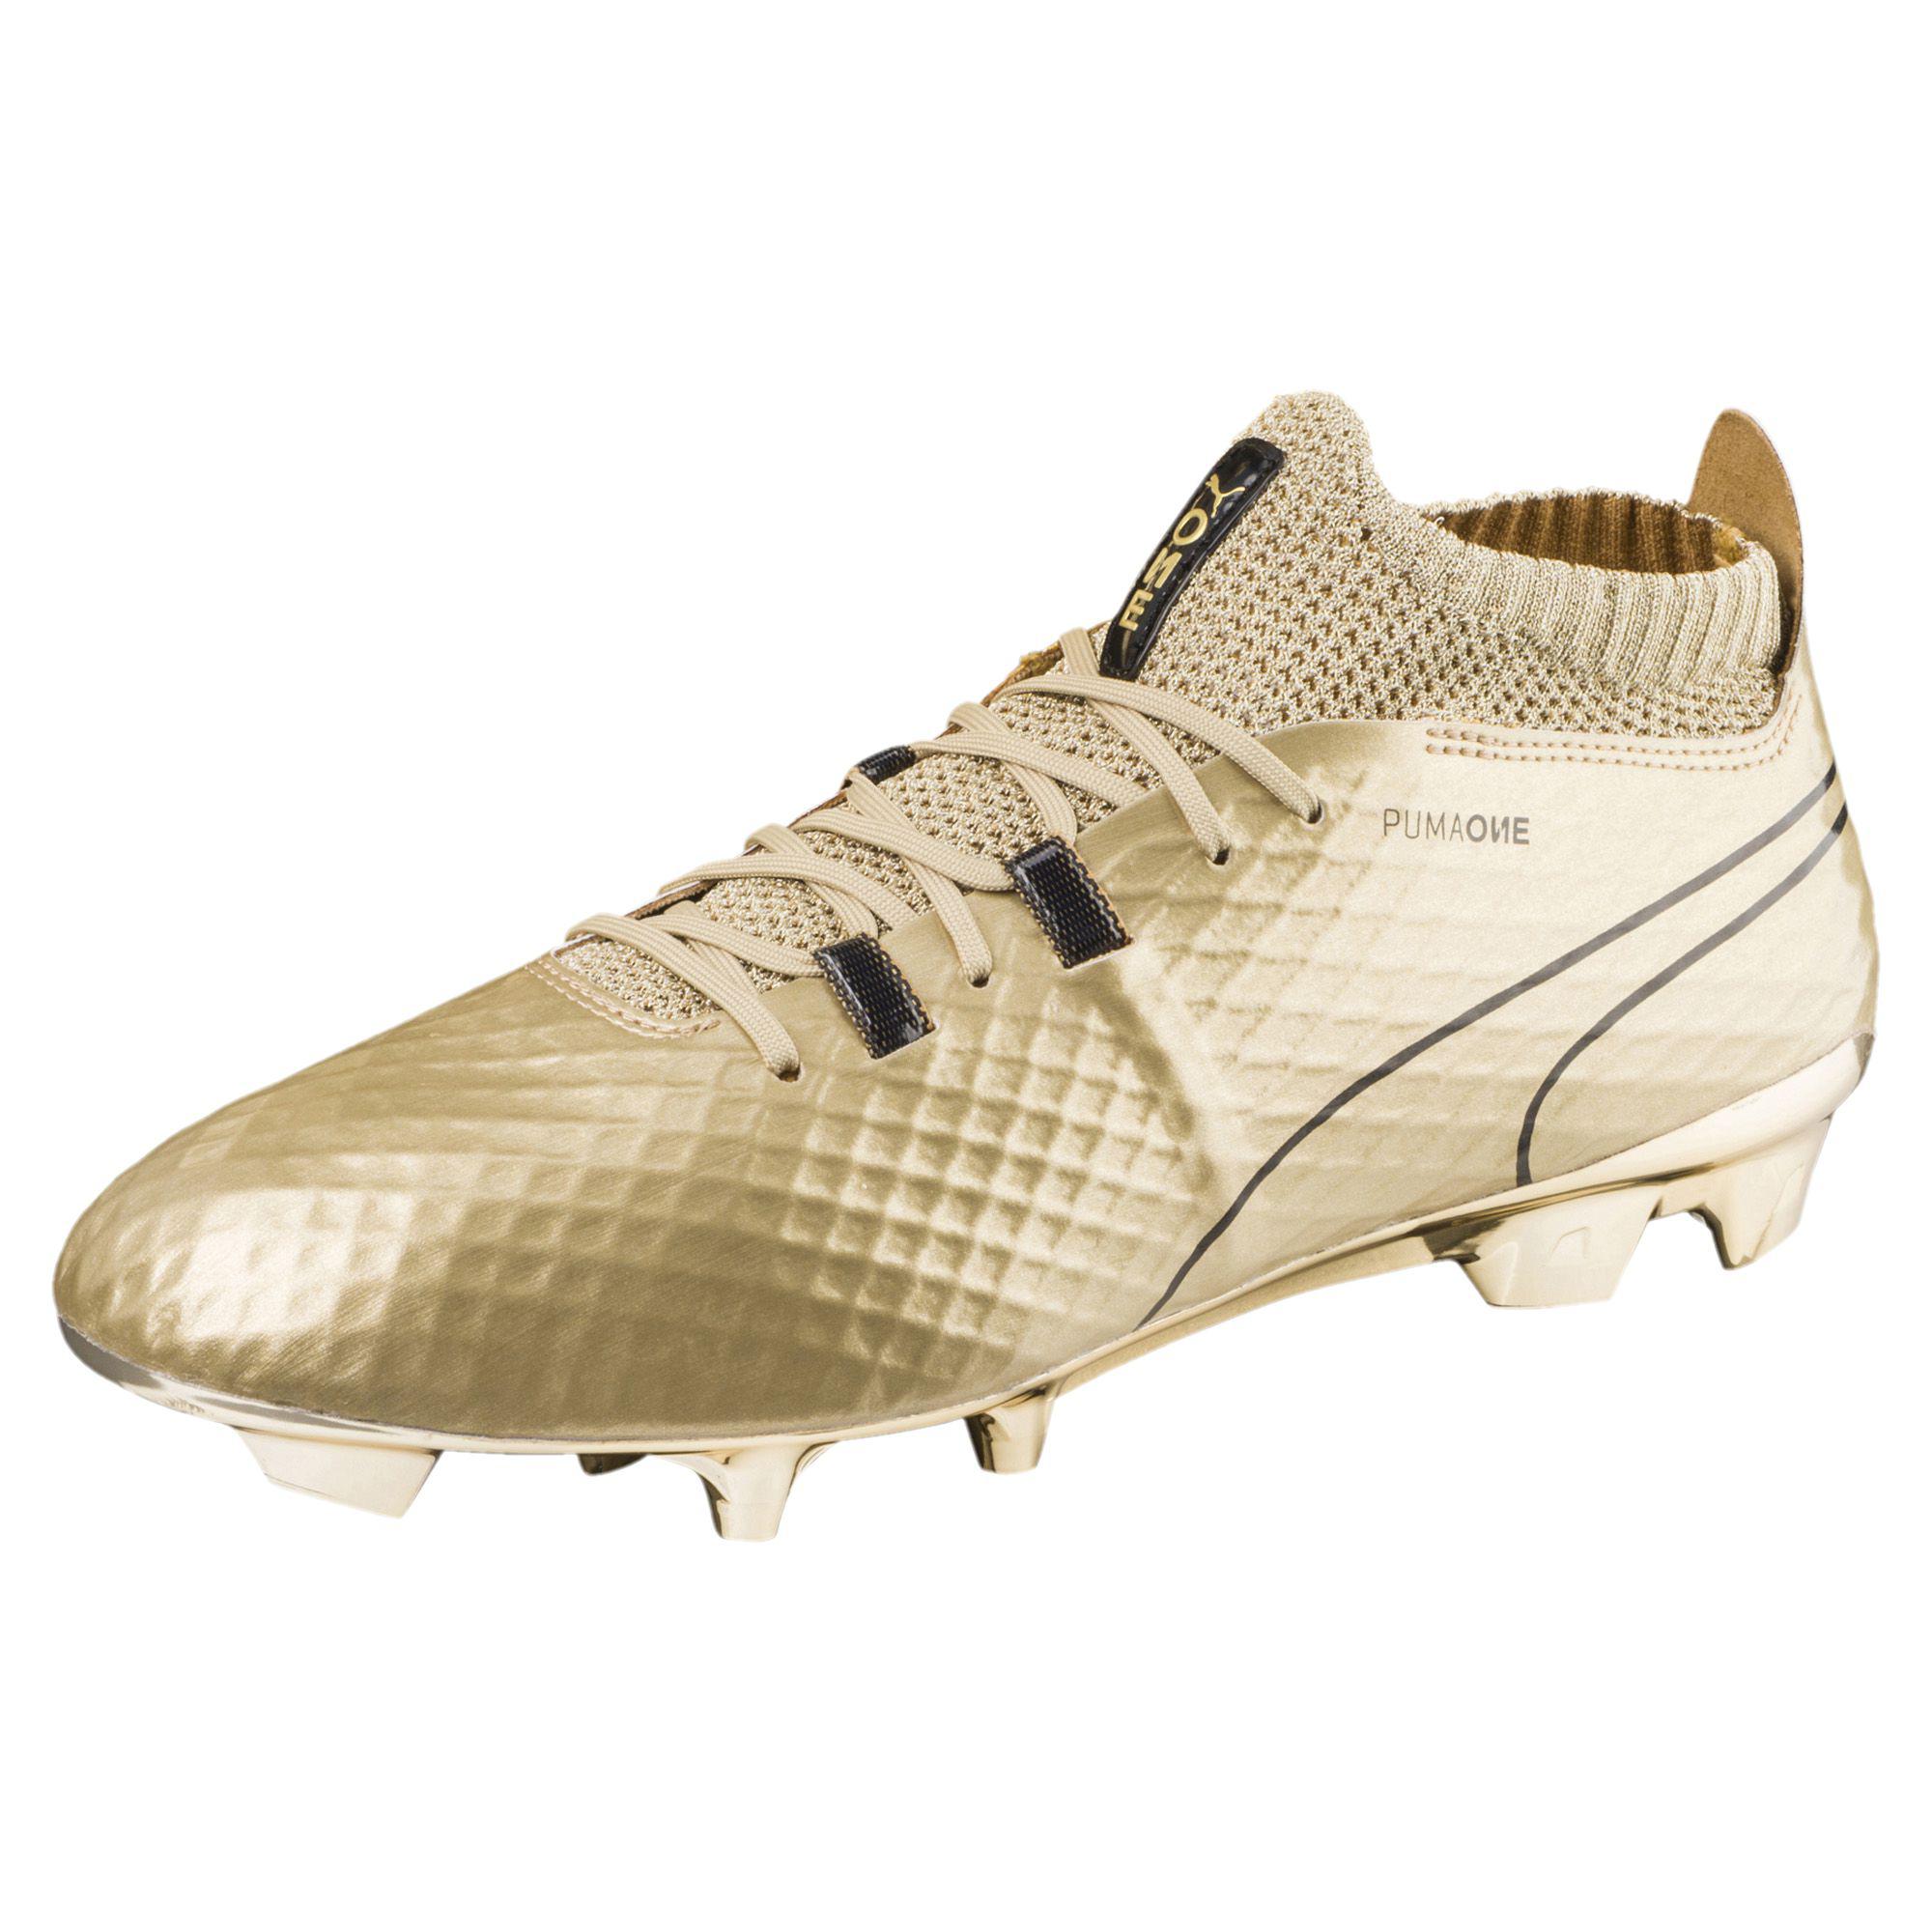 PUMA One Gold Fg Men's Soccer Cleats in Metallic for Men | Lyst